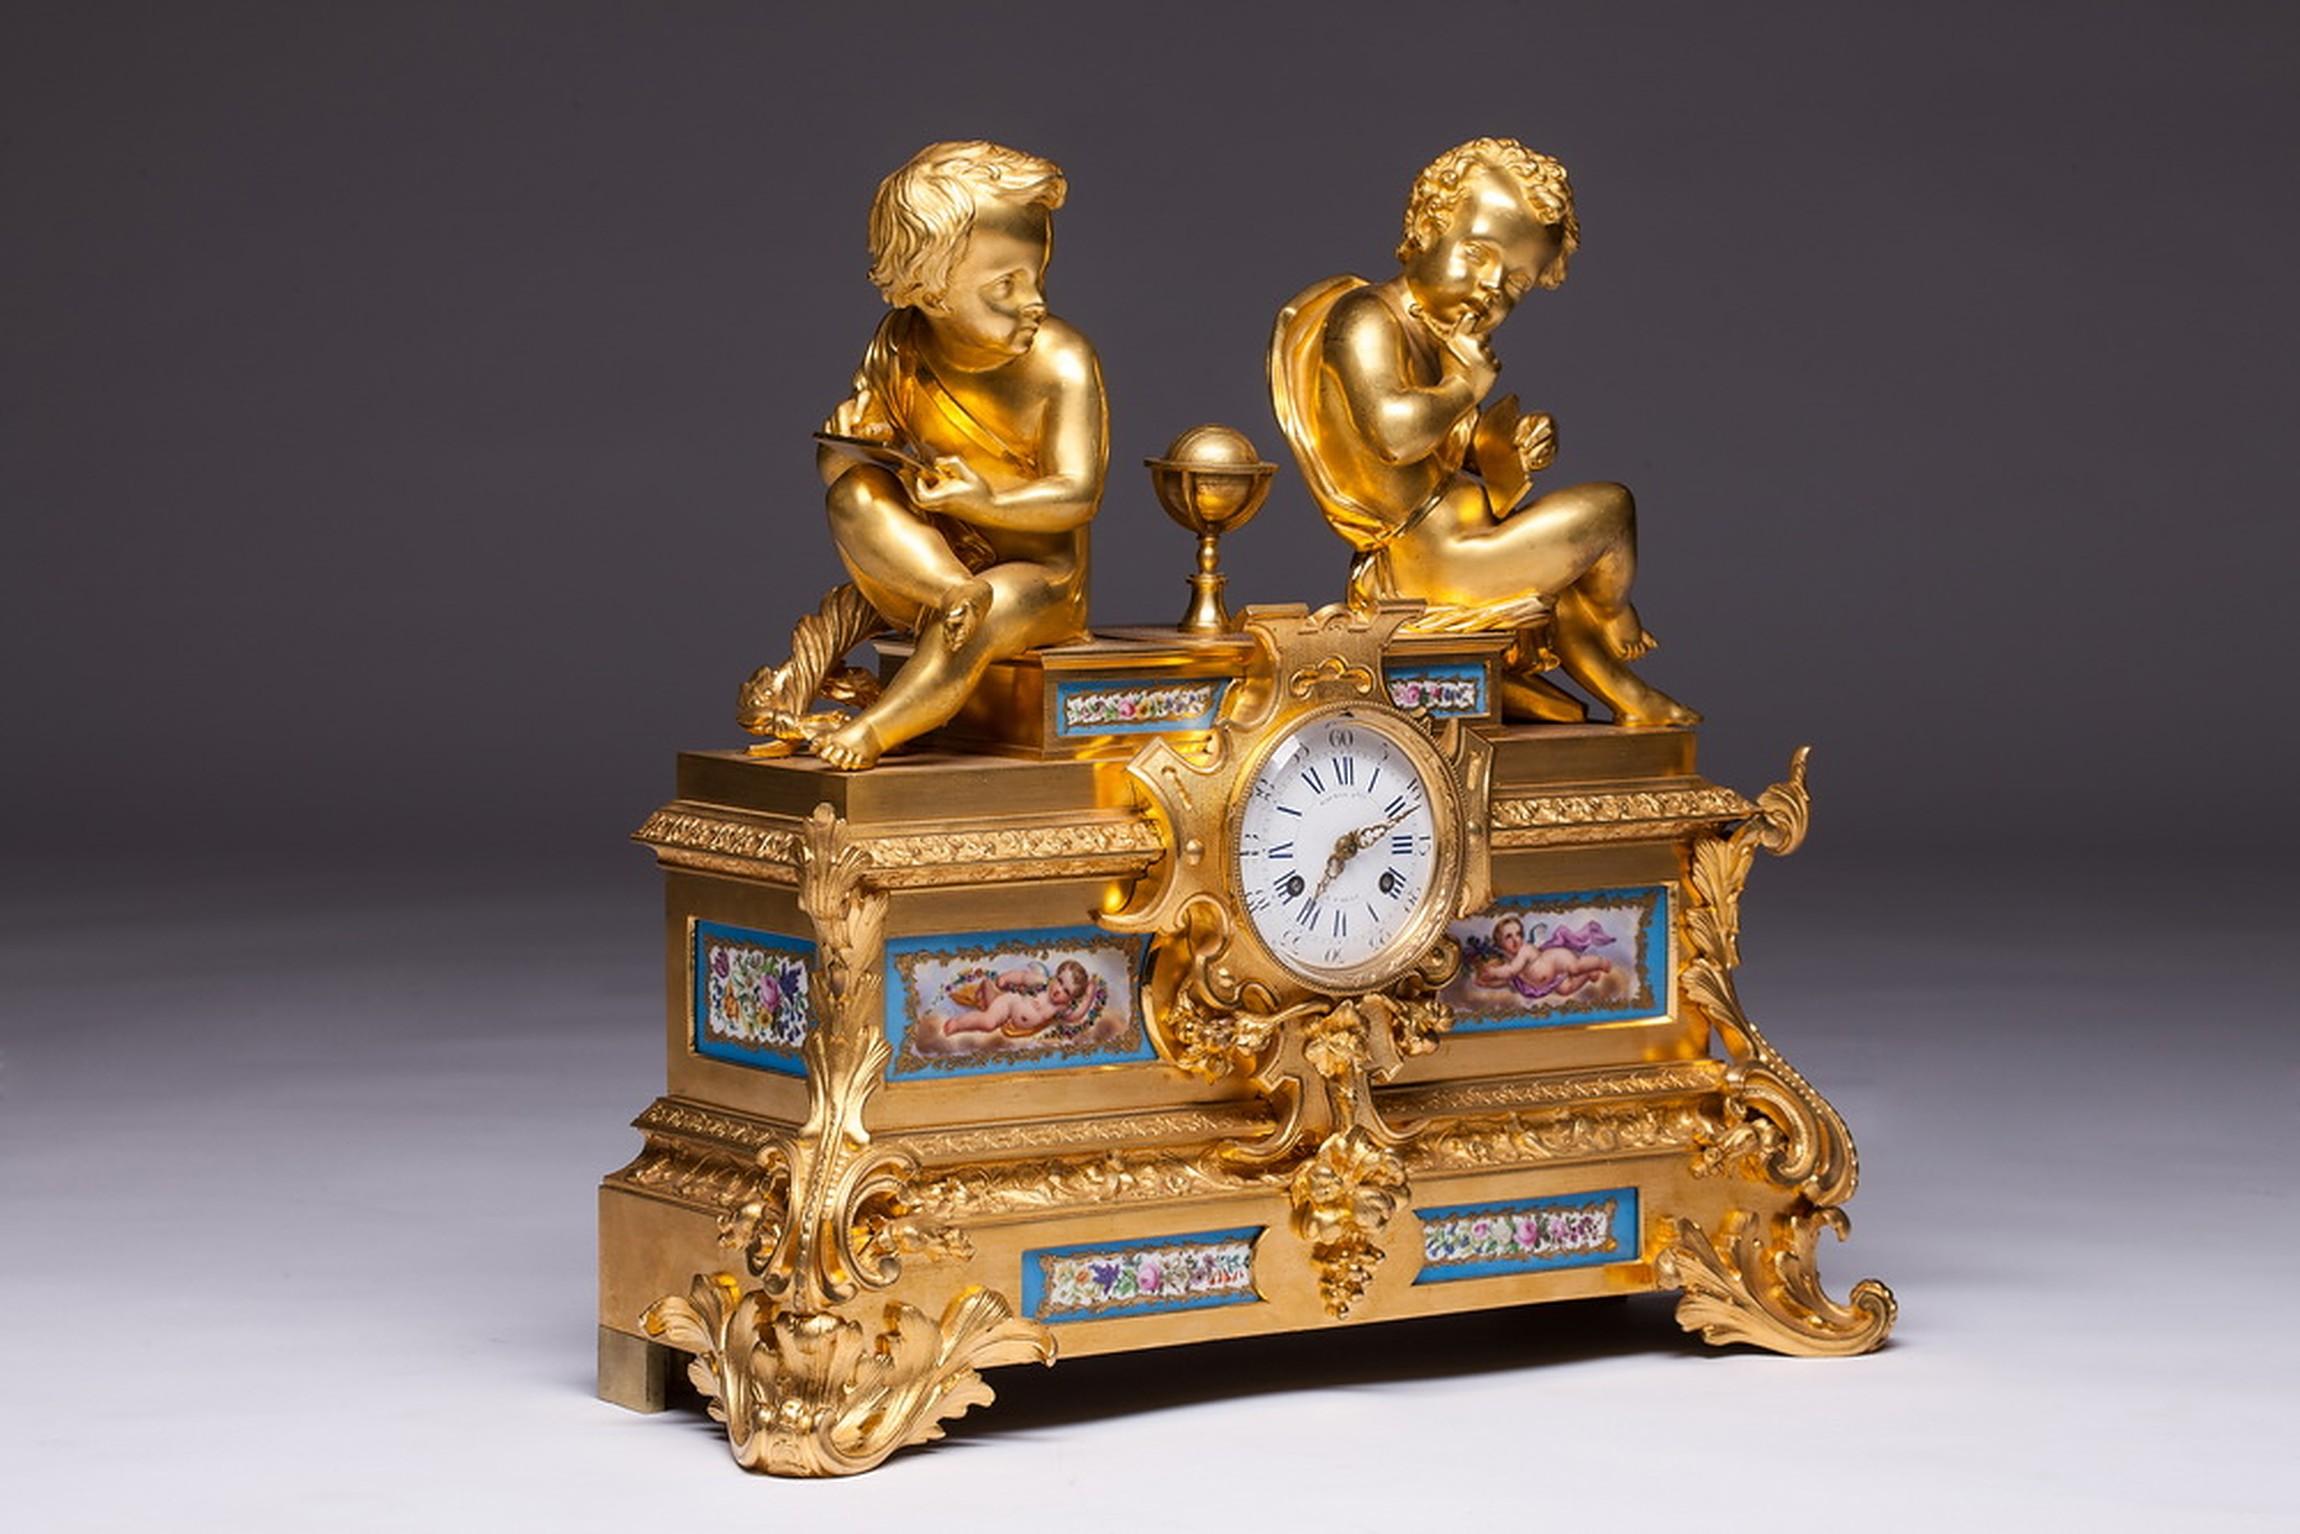 19th Century French Gilt Bronze and Sevres Porcelain Clock By Raingo Freres.
A very fine and early gilded bronze clock mounted with Sèvres porcelain panels. Two seated cherubs sit on each side with a globe besides them.

Raingo was a French